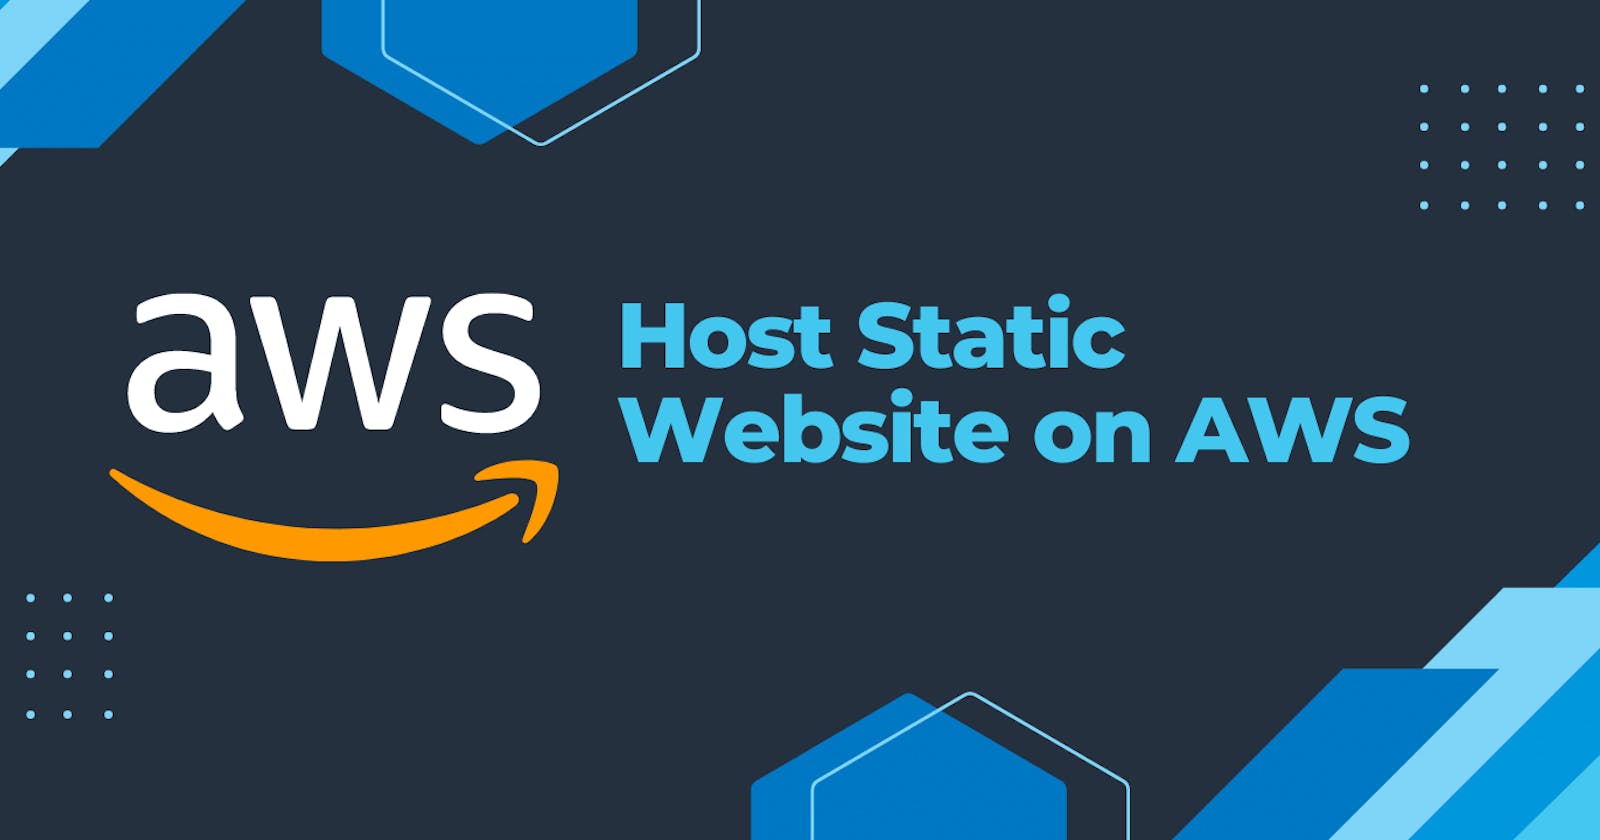 Host a static website on AWS S3 with Cloudfront and implement CI/CD